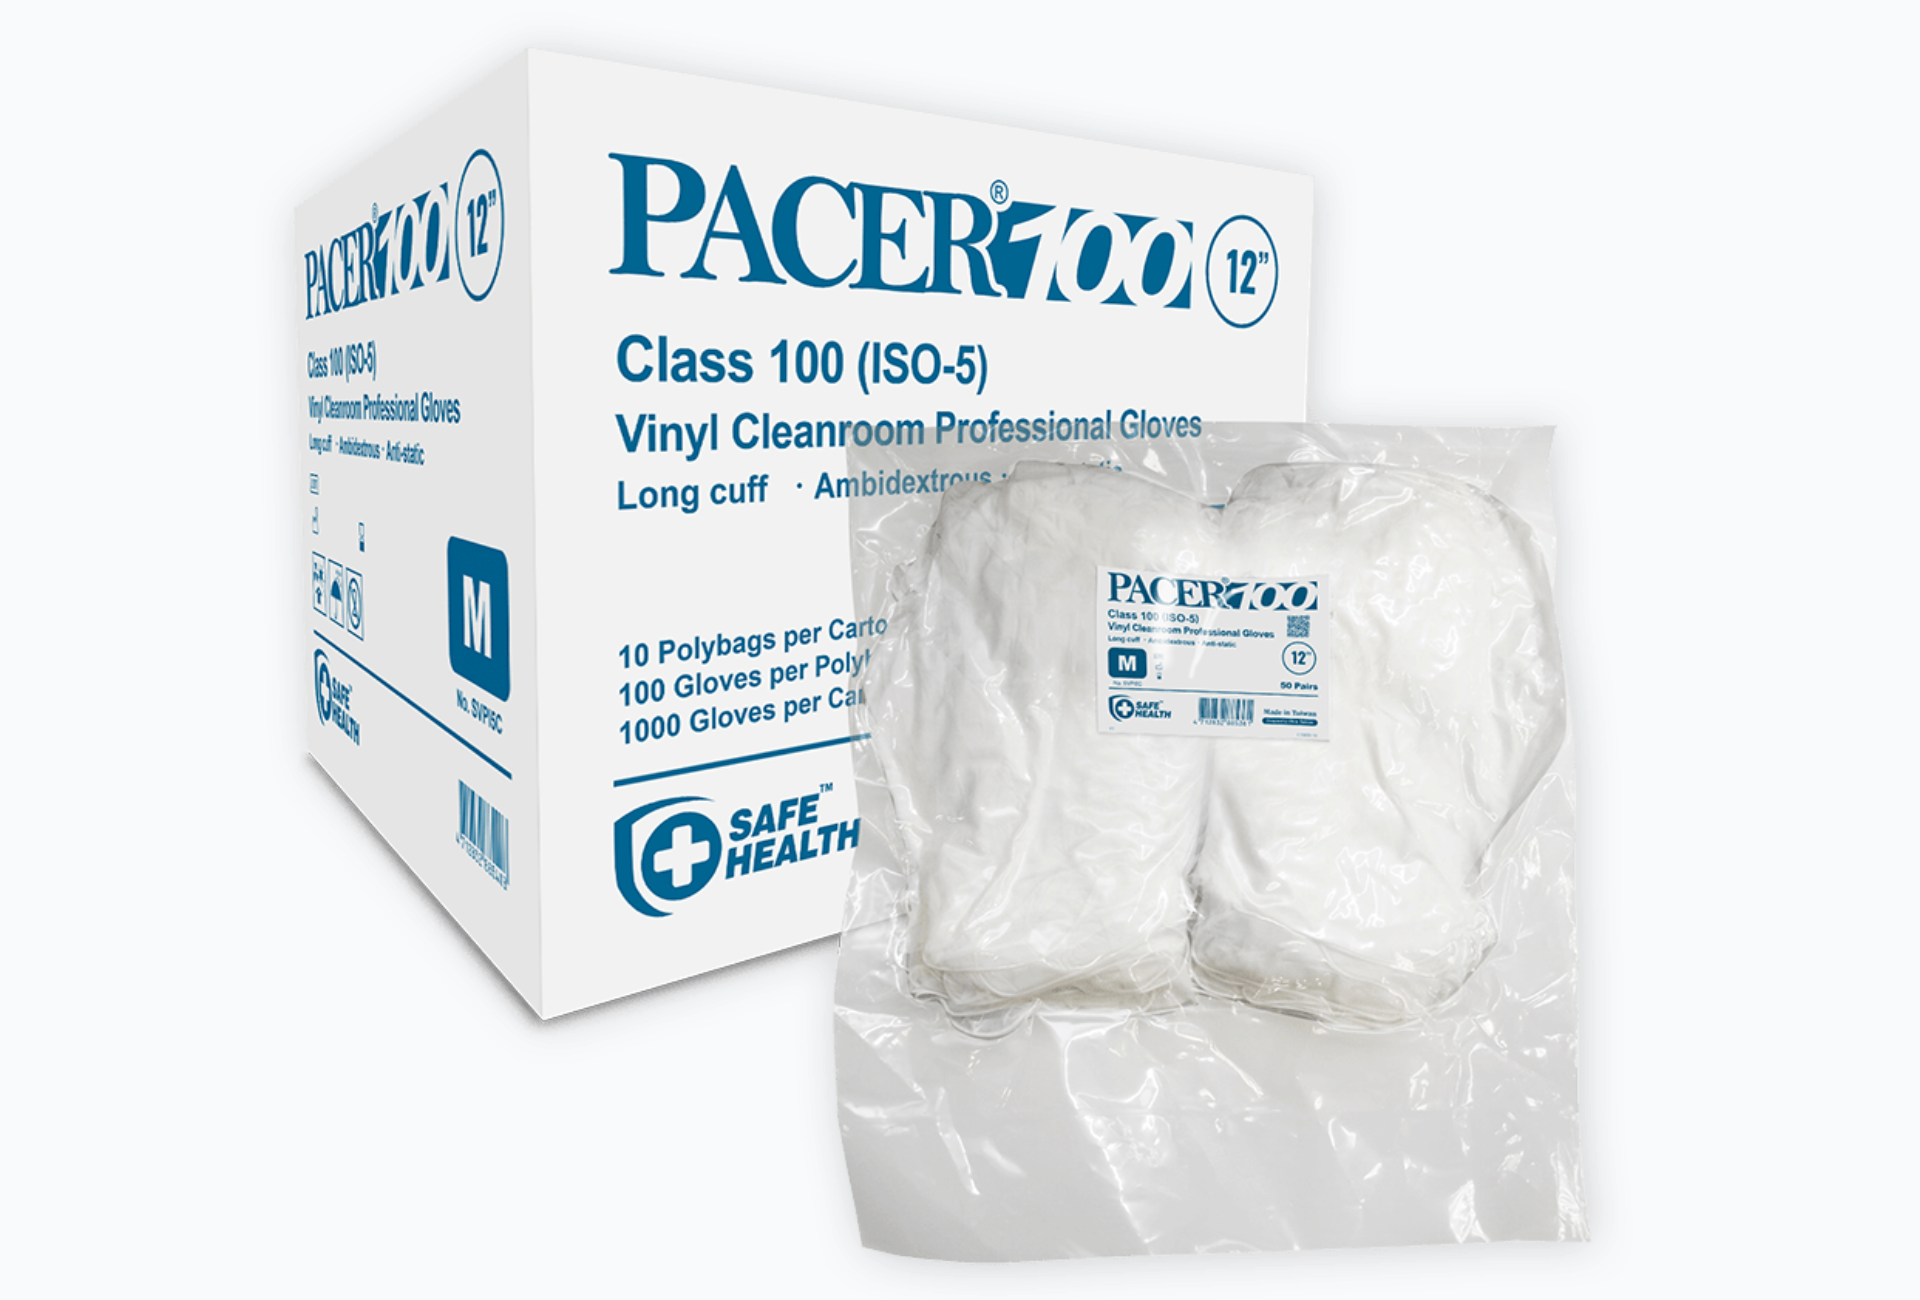 PACER 100 Supreme Vinyl Cleanroom Professional Gloves - Long Cuff